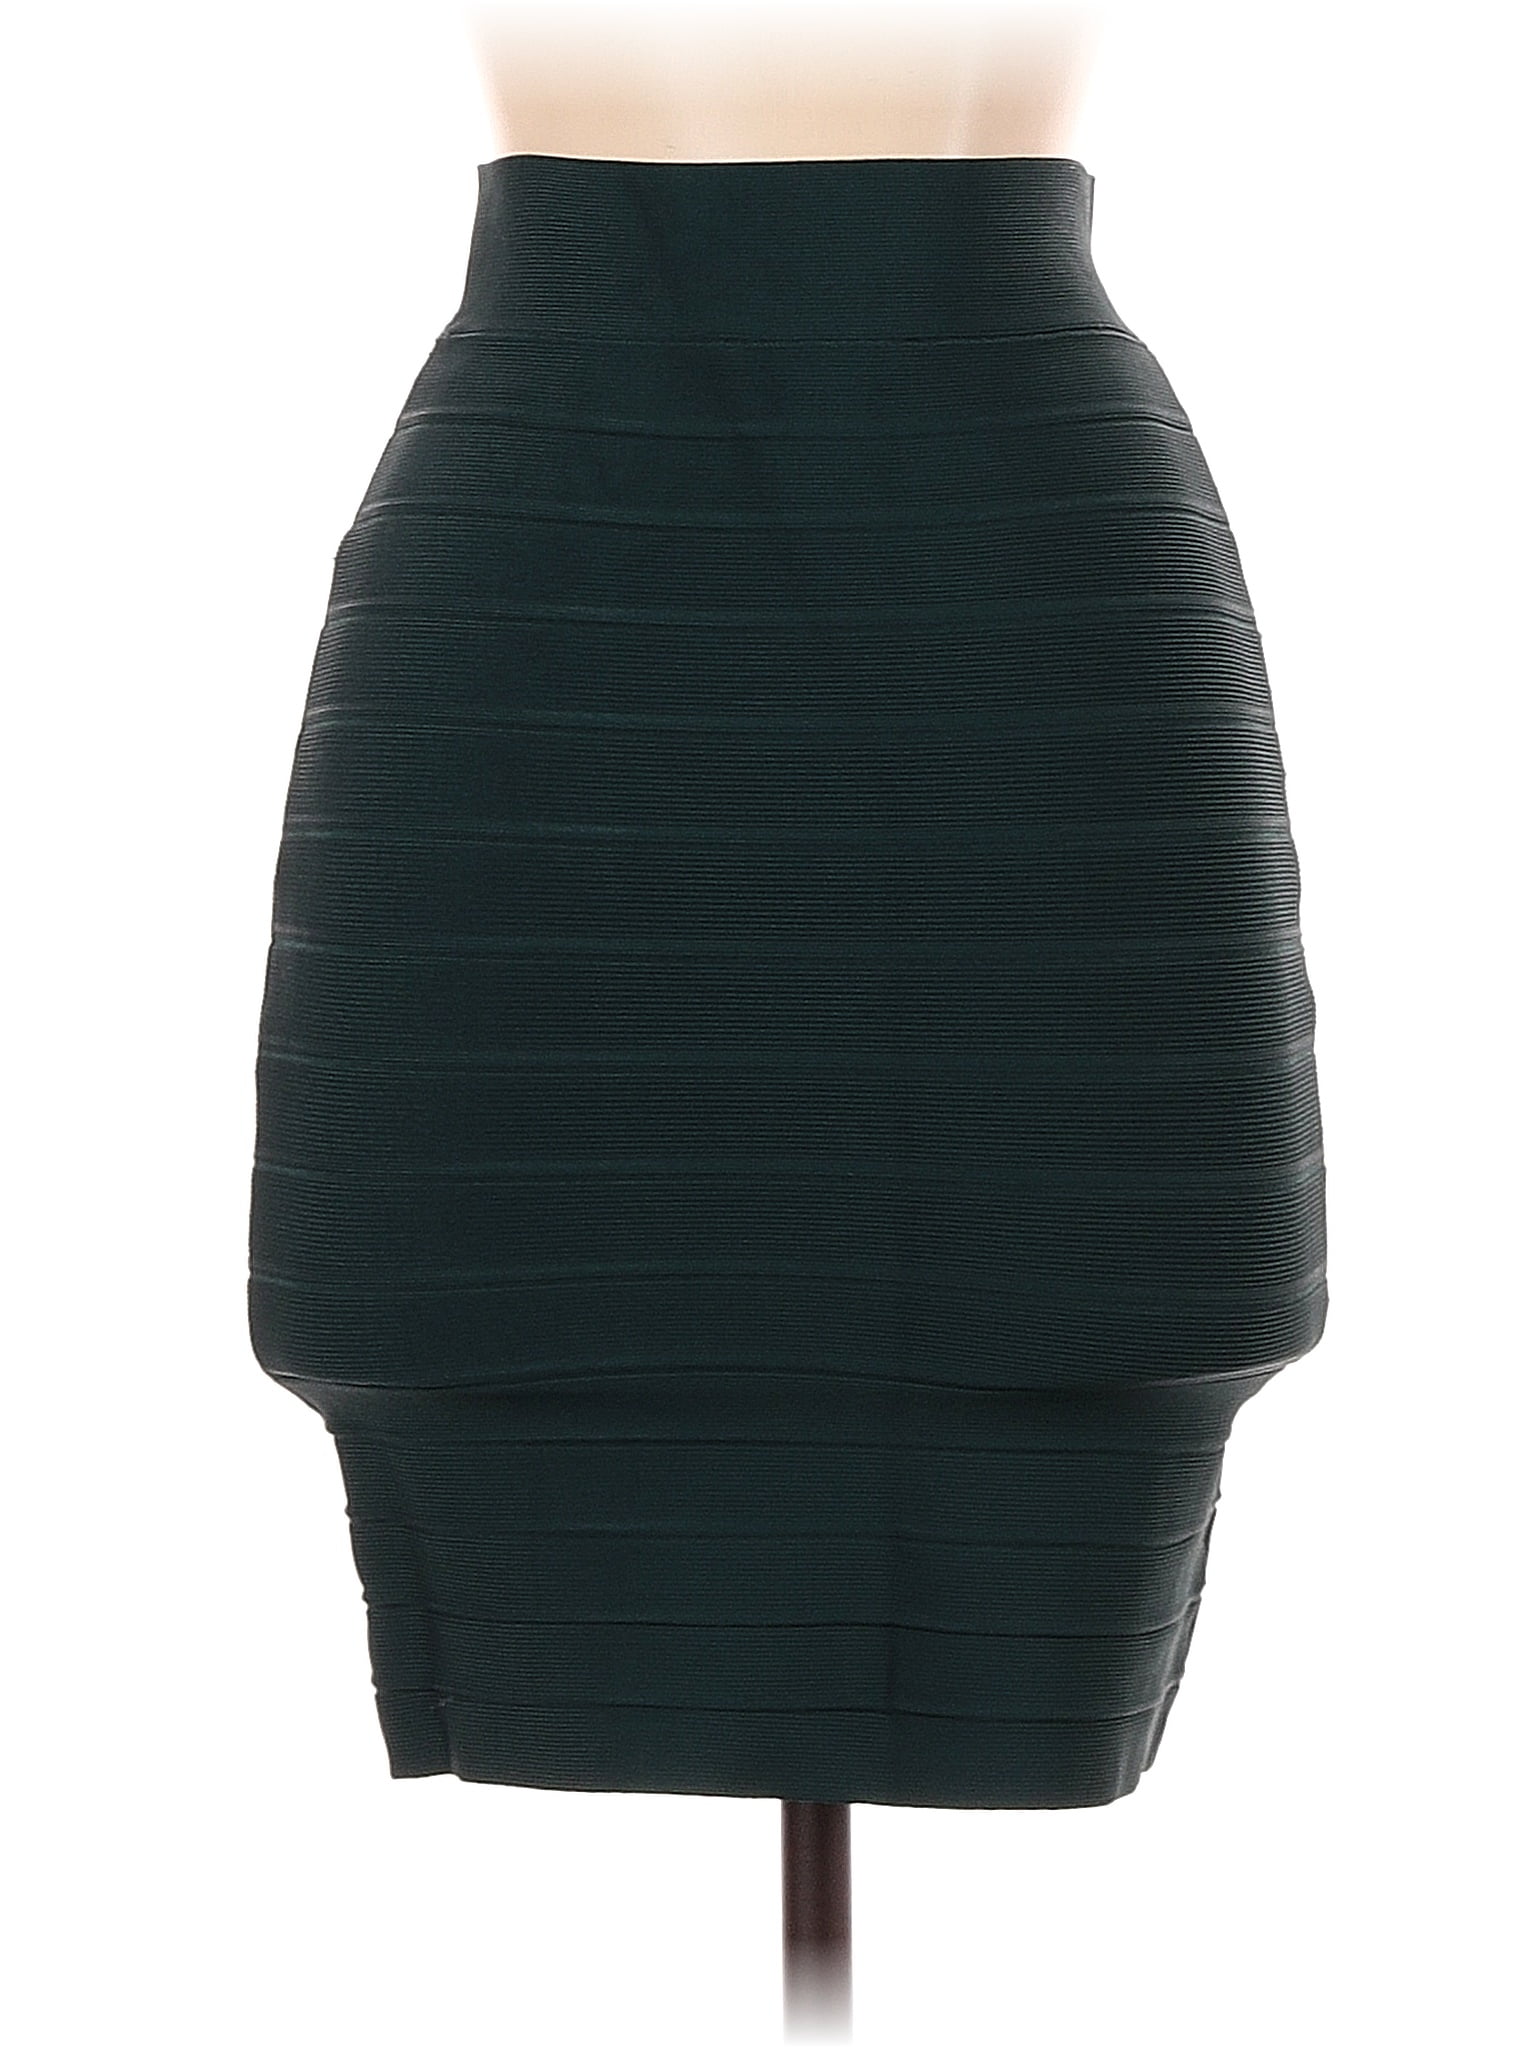 BCBGMAXAZRIA Solid Green Teal Casual Skirt Size XS - 81% off